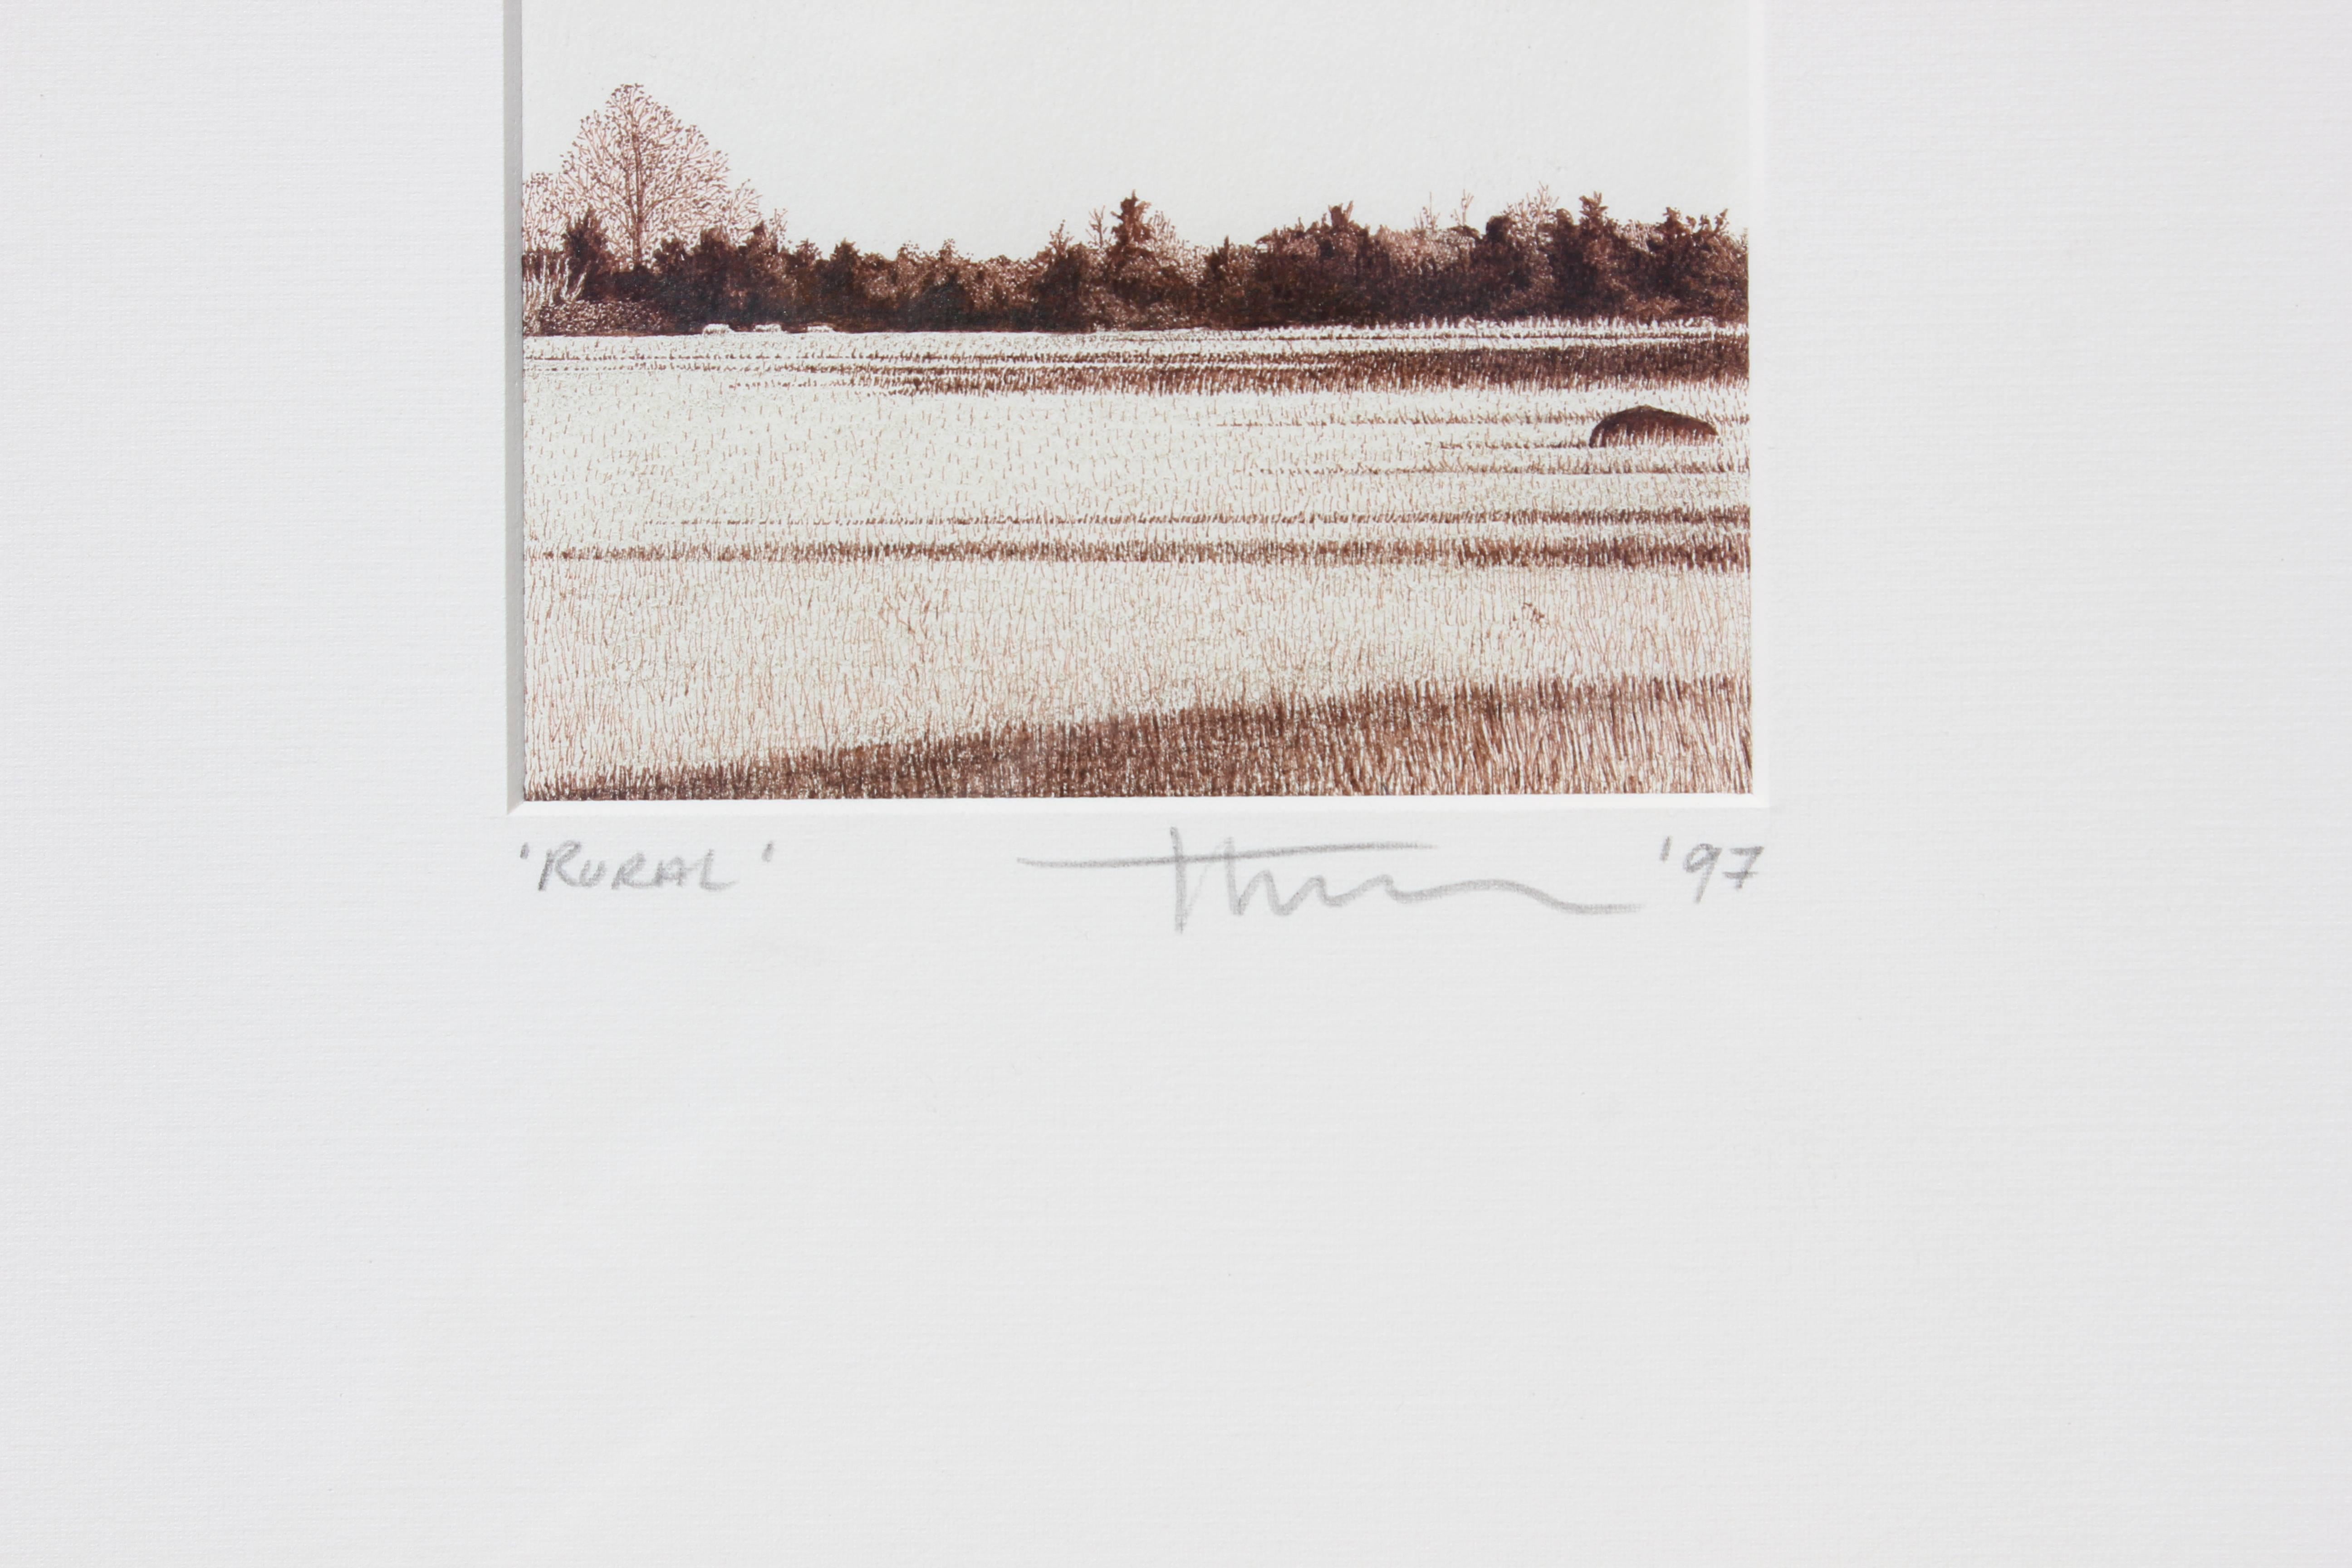 'Rural' Landscape Drawing by Terry Moore 1